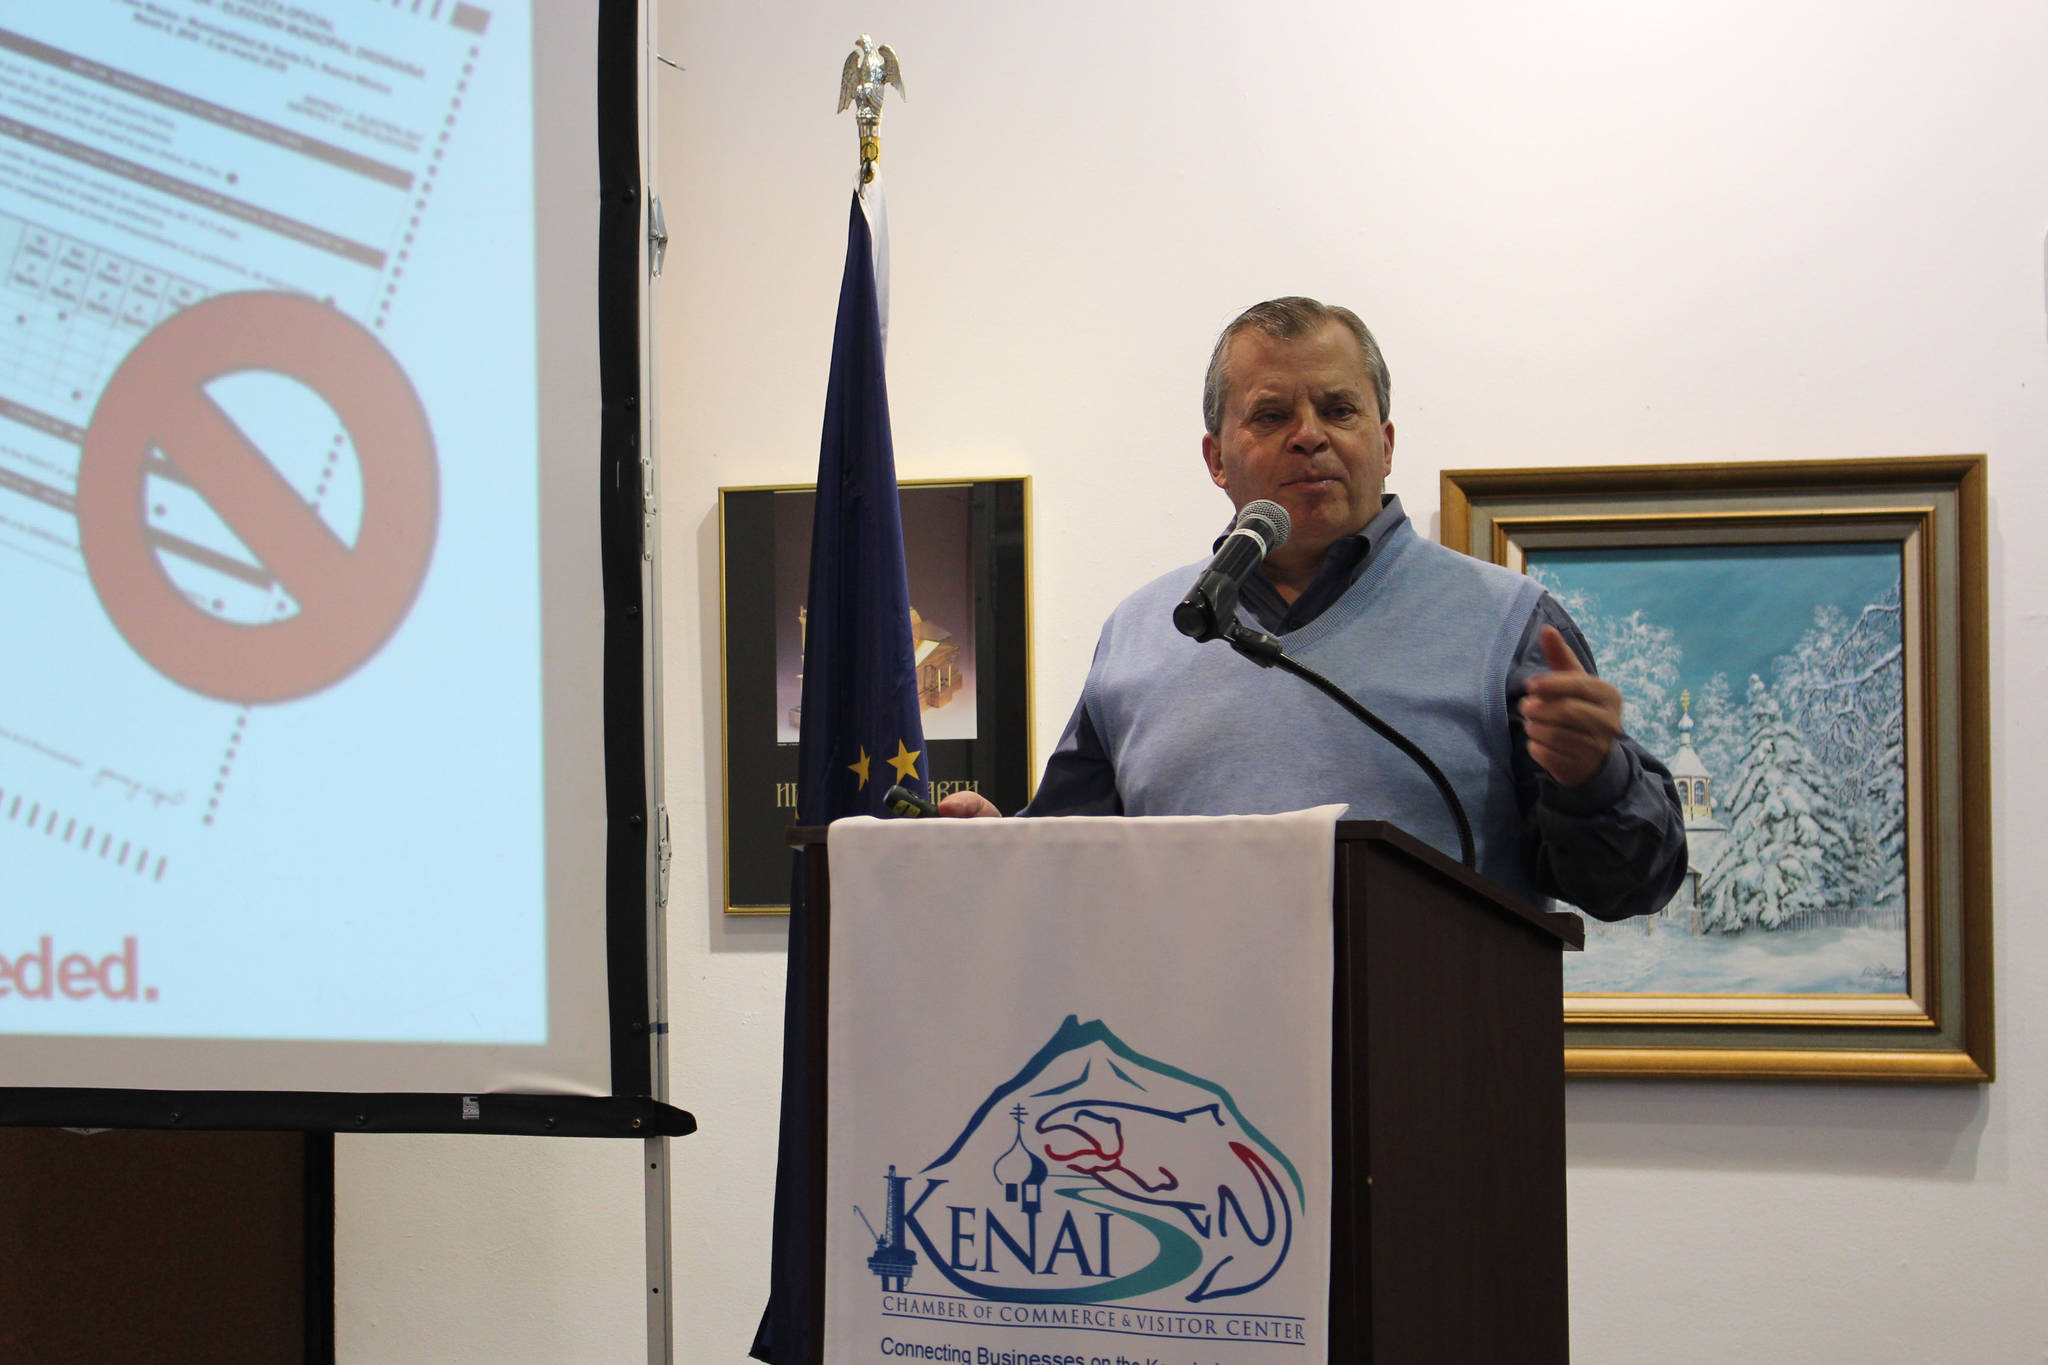 Tim Navarre argues against Ballot Measure 2 during the Kenai and Soldotna Chambers of Commerce Joint Luncheon at the Kenai Visitor and Cultural Center on Oct. 28; 2020. (Photo by Brian Mazurek/Peninsula Clarion)